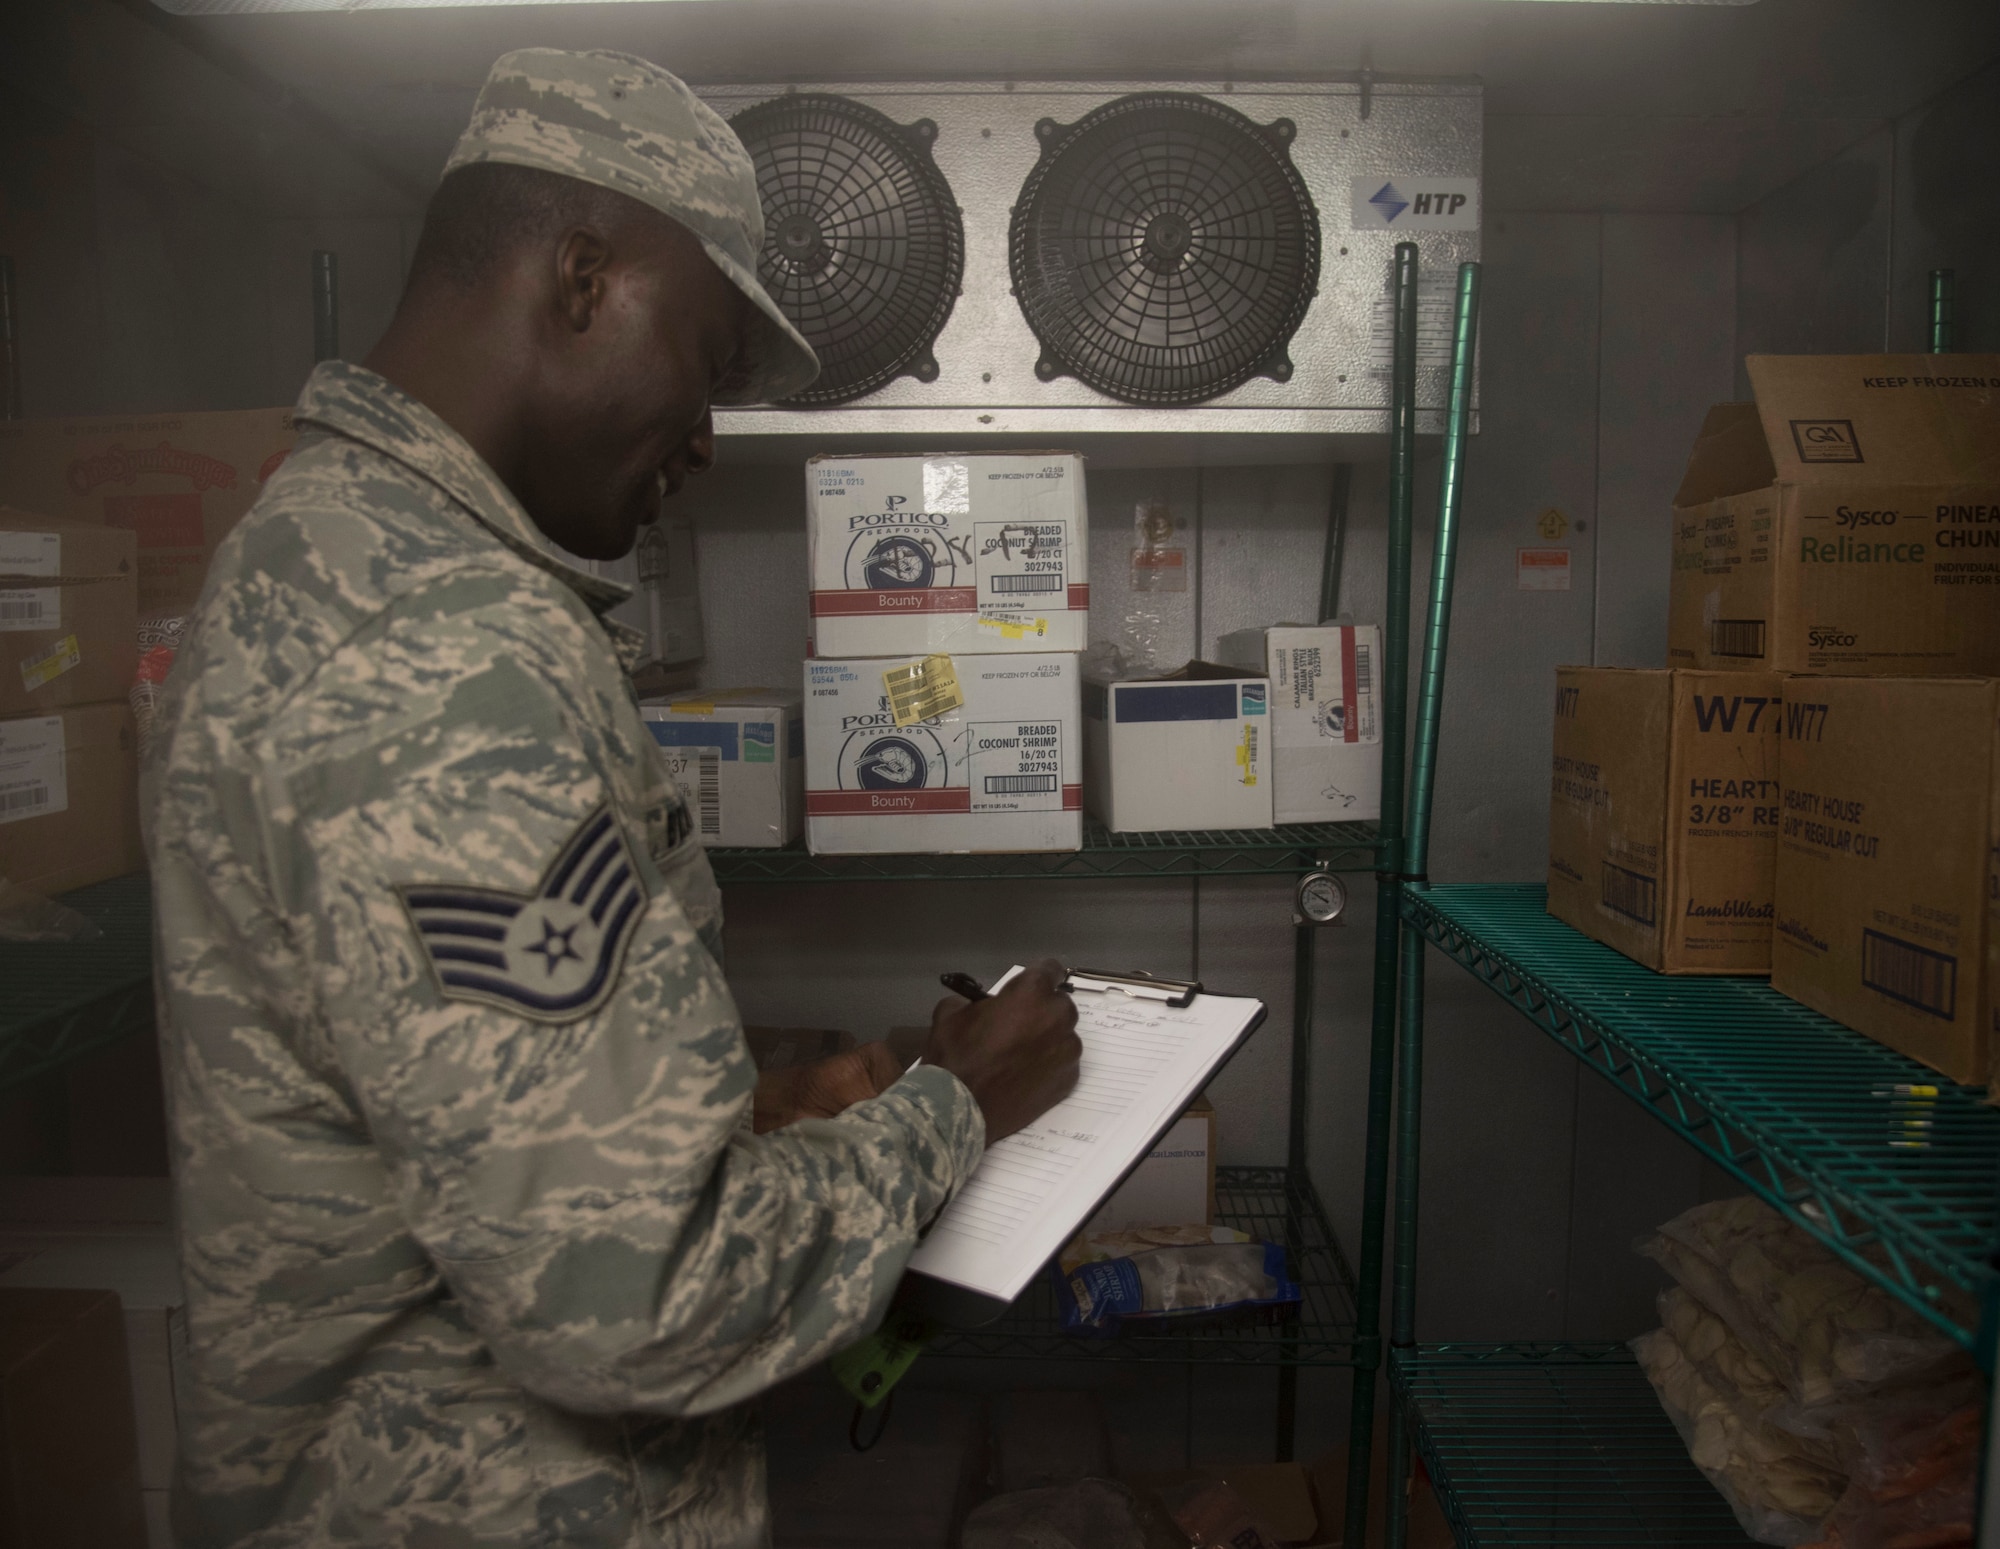 U.S. Air Force Staff Sgt. Cornelius Bransah, the NCO in charge of food safety and sanitation assigned to the 6th Aerospace Medical Squadron, writes down notes after inspecting a walk-in freezer at MacDill Air Force Base, Fla., June 13, 2017. Bransah checks dates, as well as the temperature of the freezer to ensure proper food safety. (U.S. Air Force photo by Airman 1st Class Adam R. Shanks)